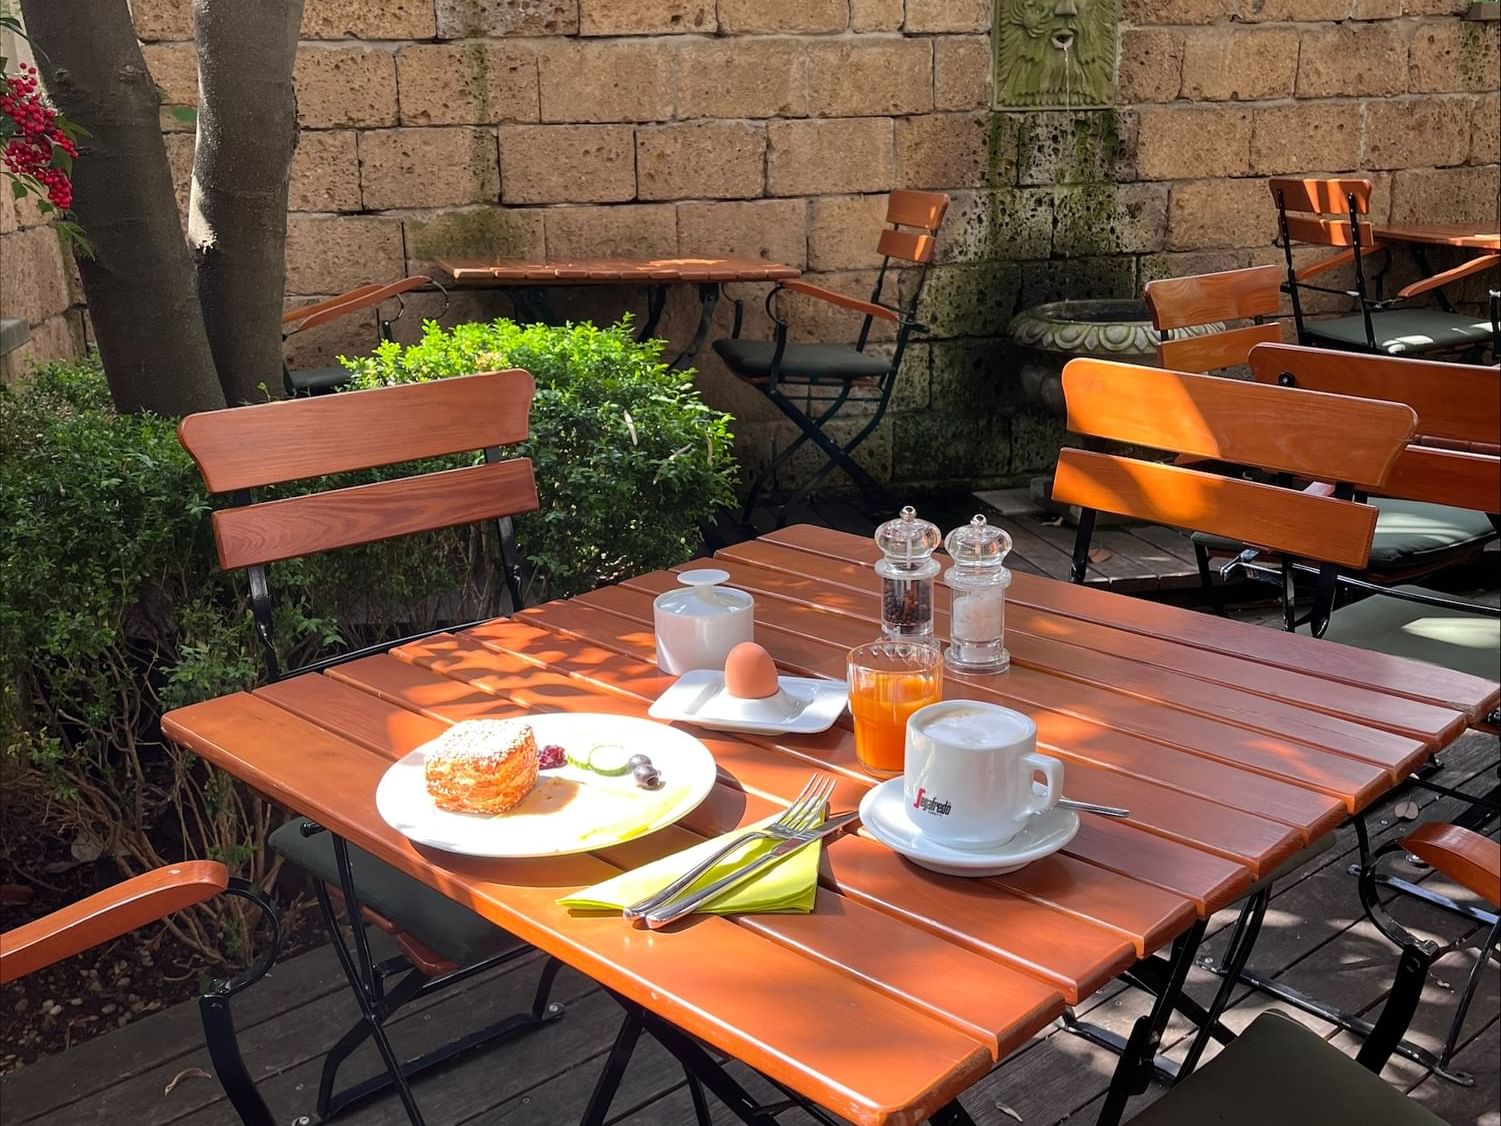 Breakfast set in outdoor dining area at Classic Hotel Harmonie